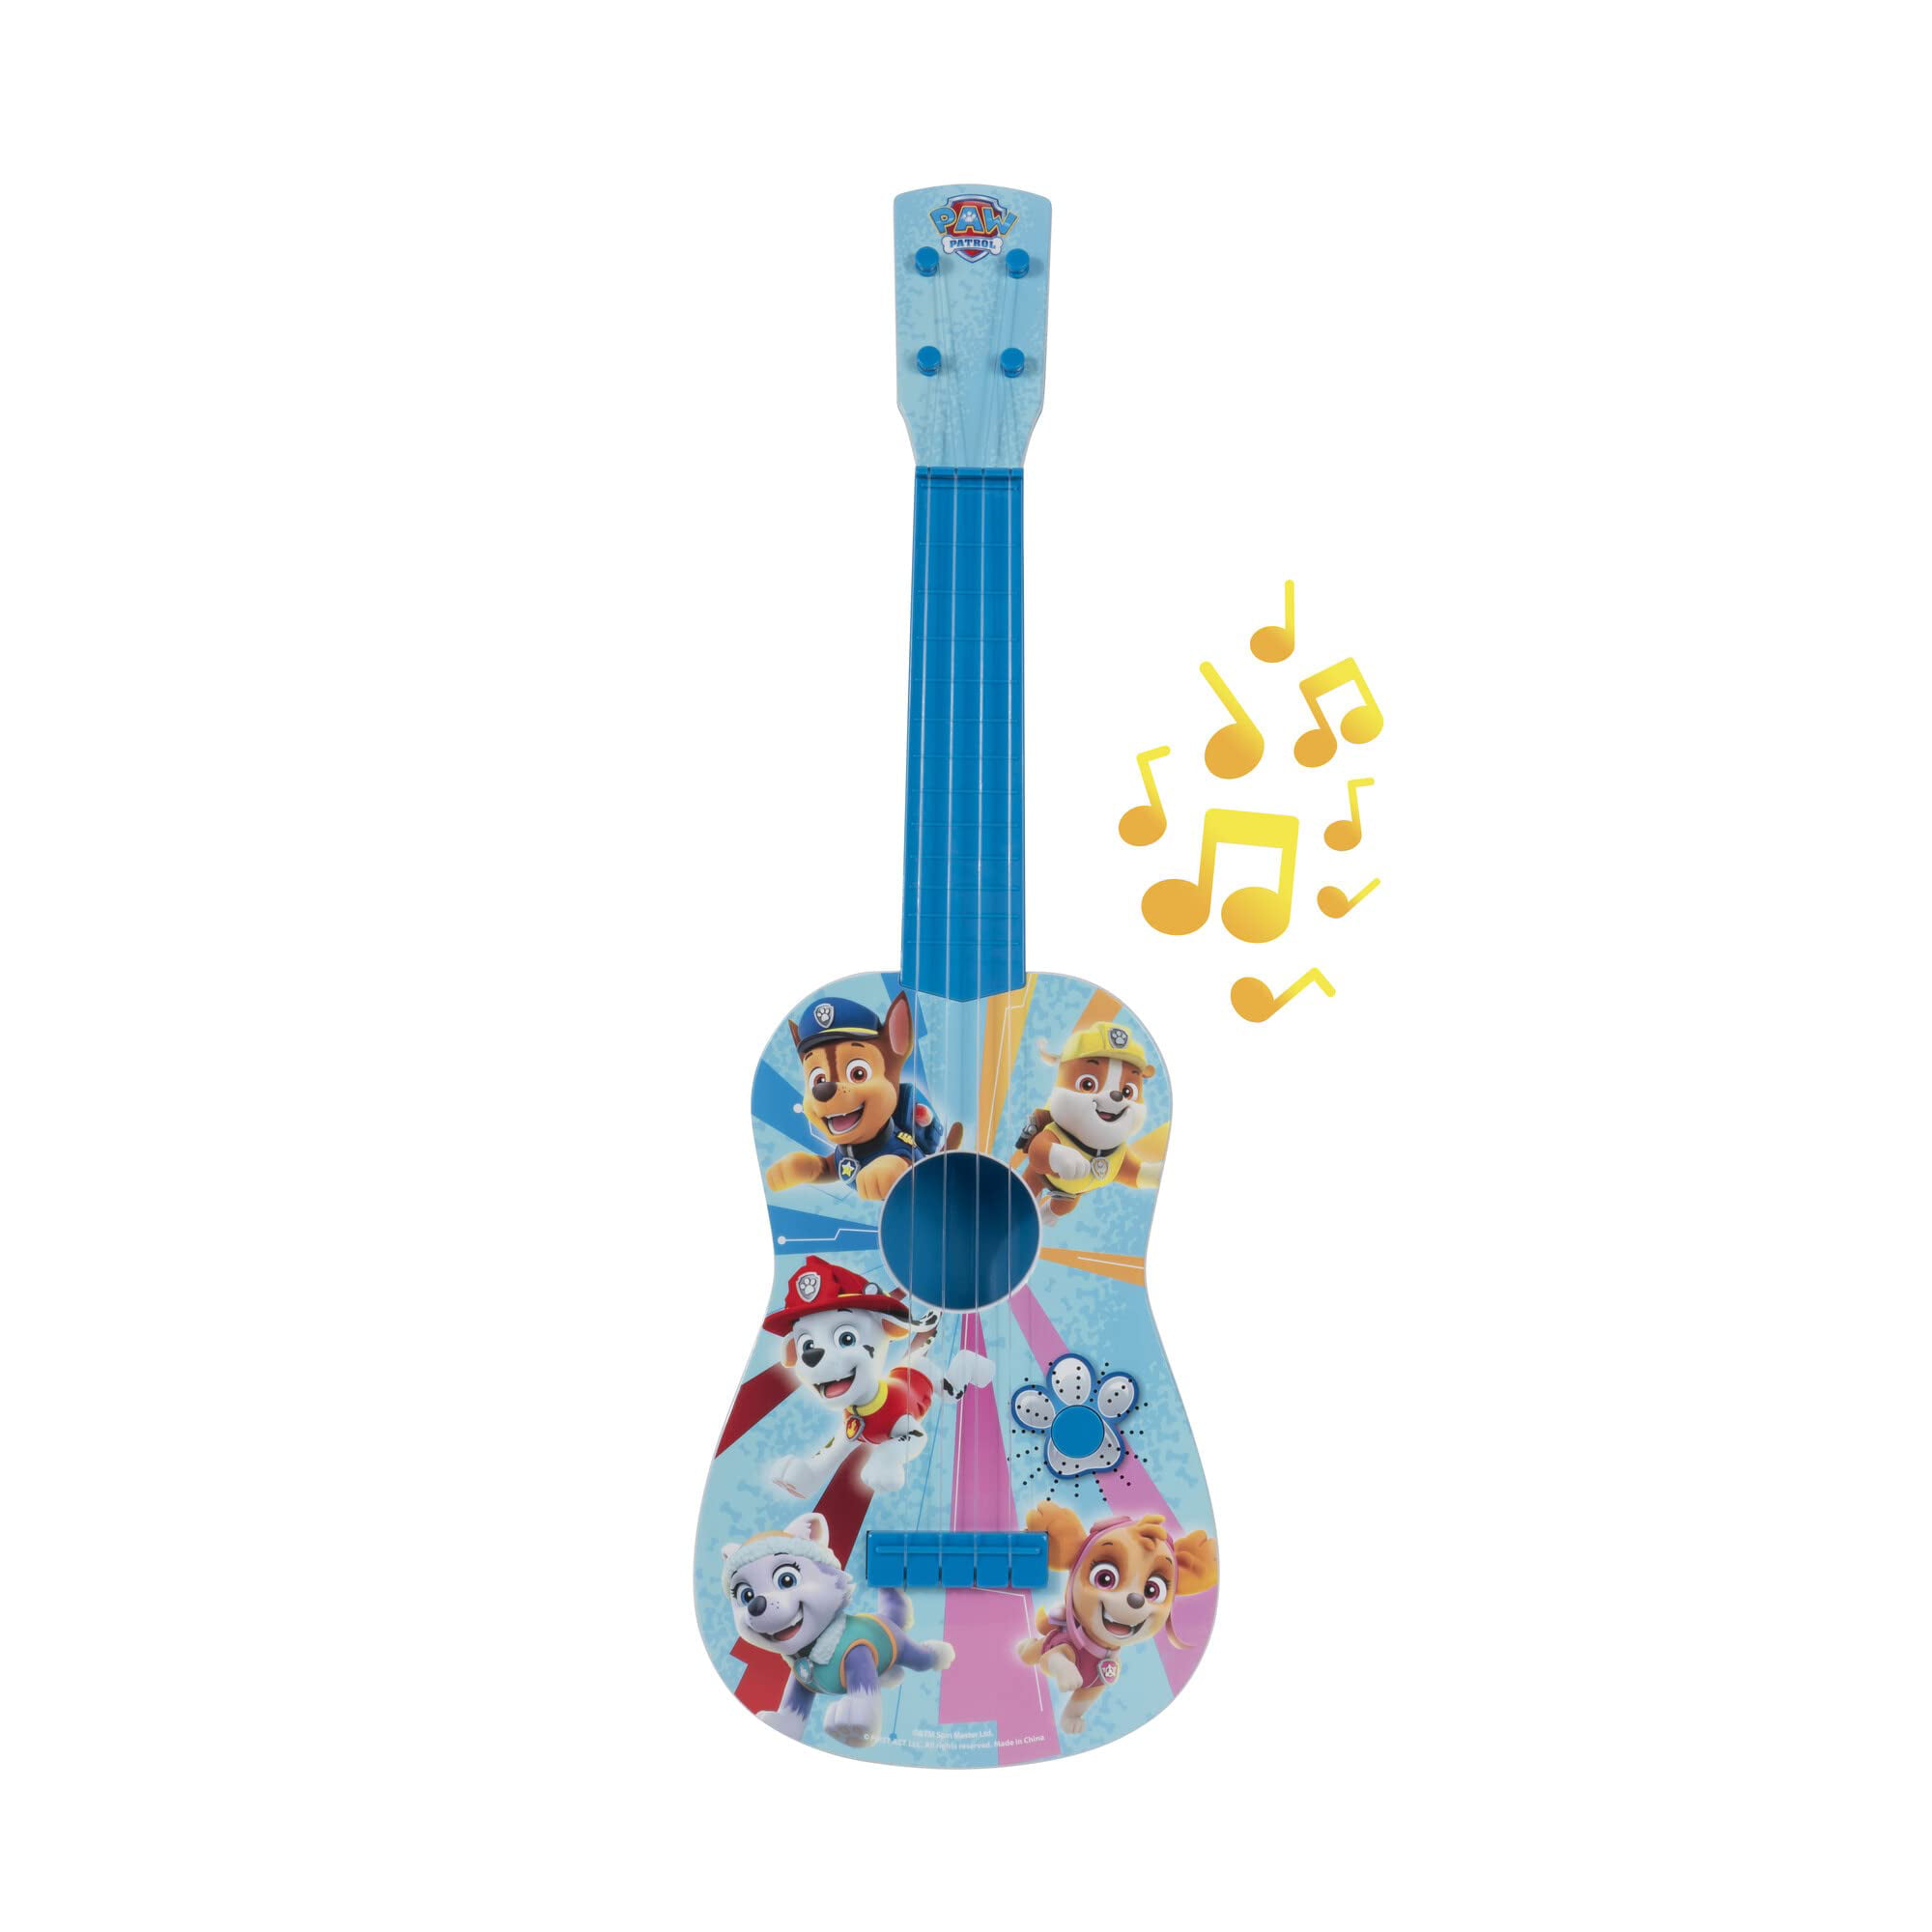 New Paw Patrol Musical Instrument Acoustic Guitar Toy 